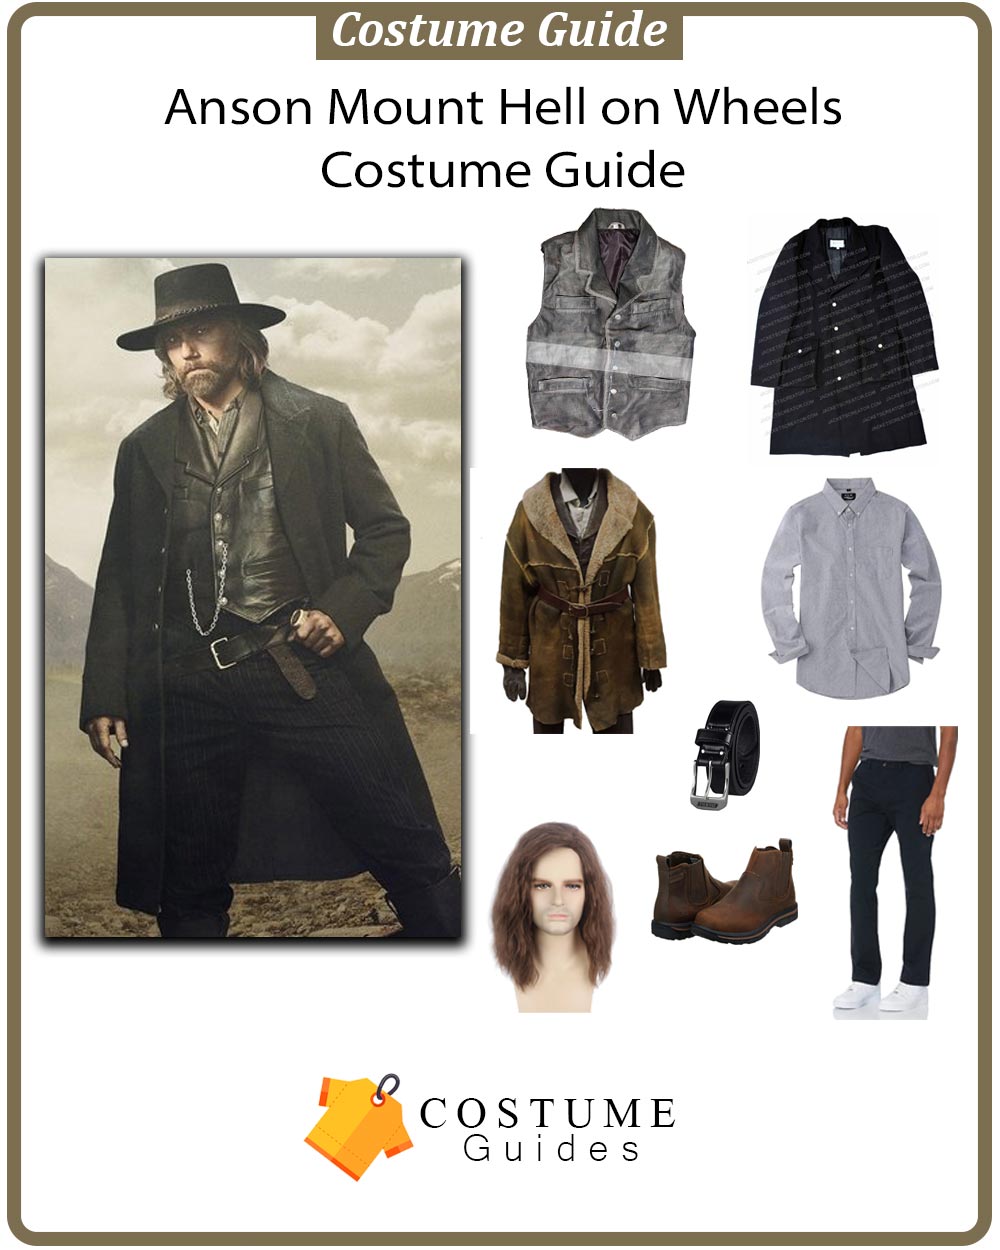 Anson Mount Hell on Wheels Costume Guide